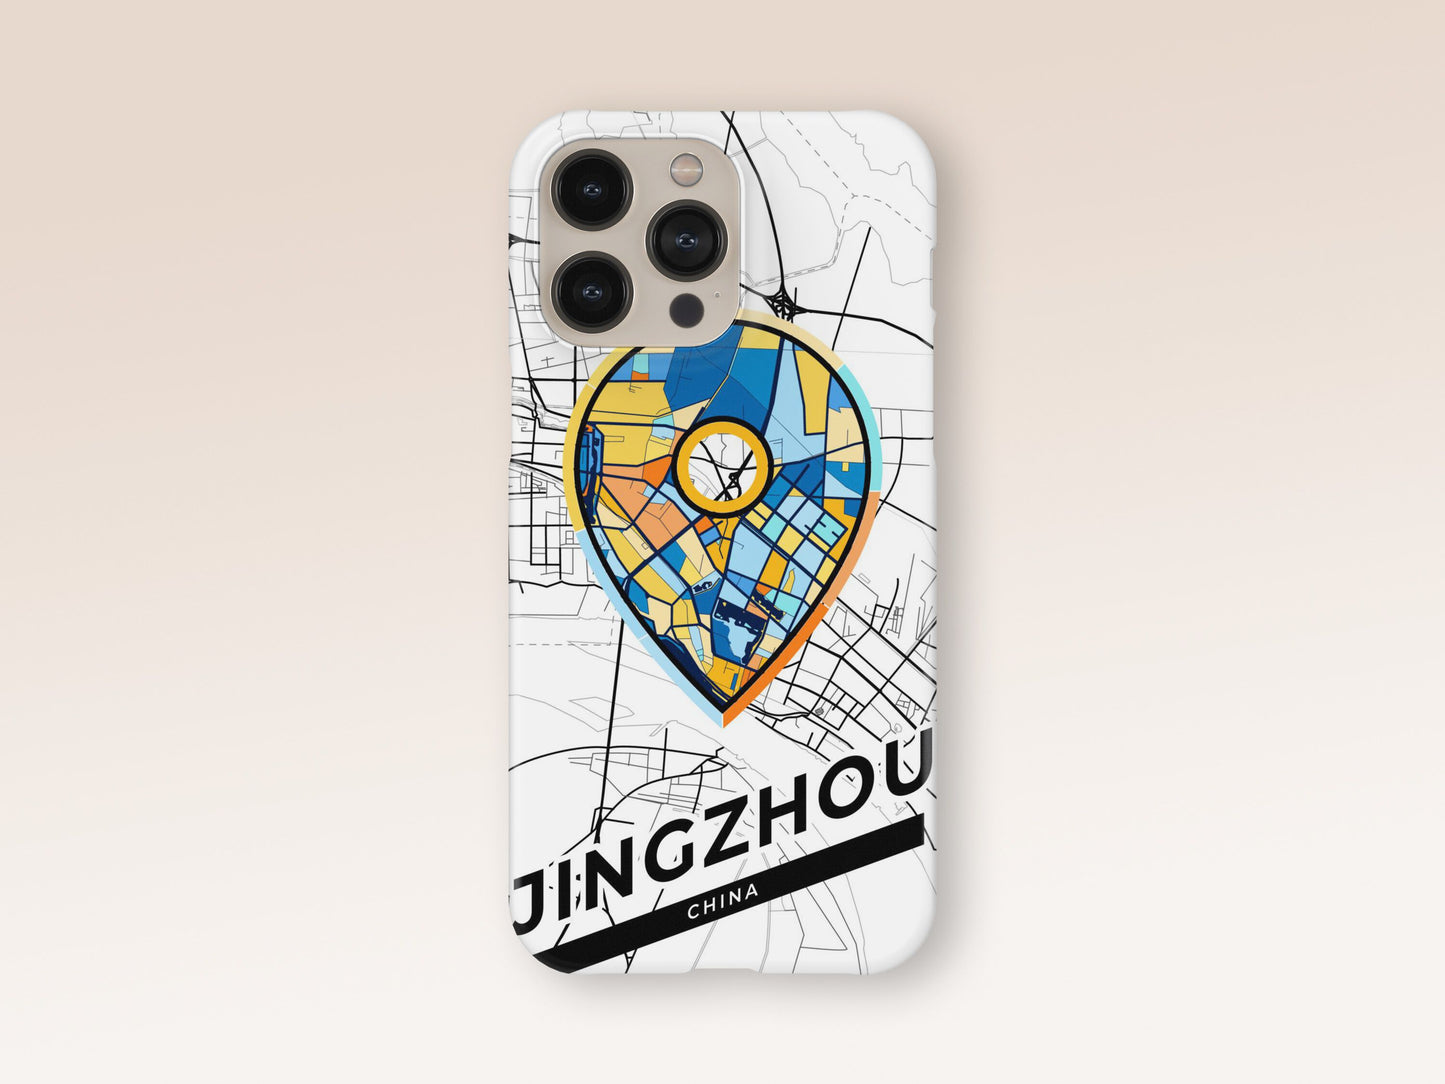 Jingzhou China slim phone case with colorful icon. Birthday, wedding or housewarming gift. Couple match cases. 1